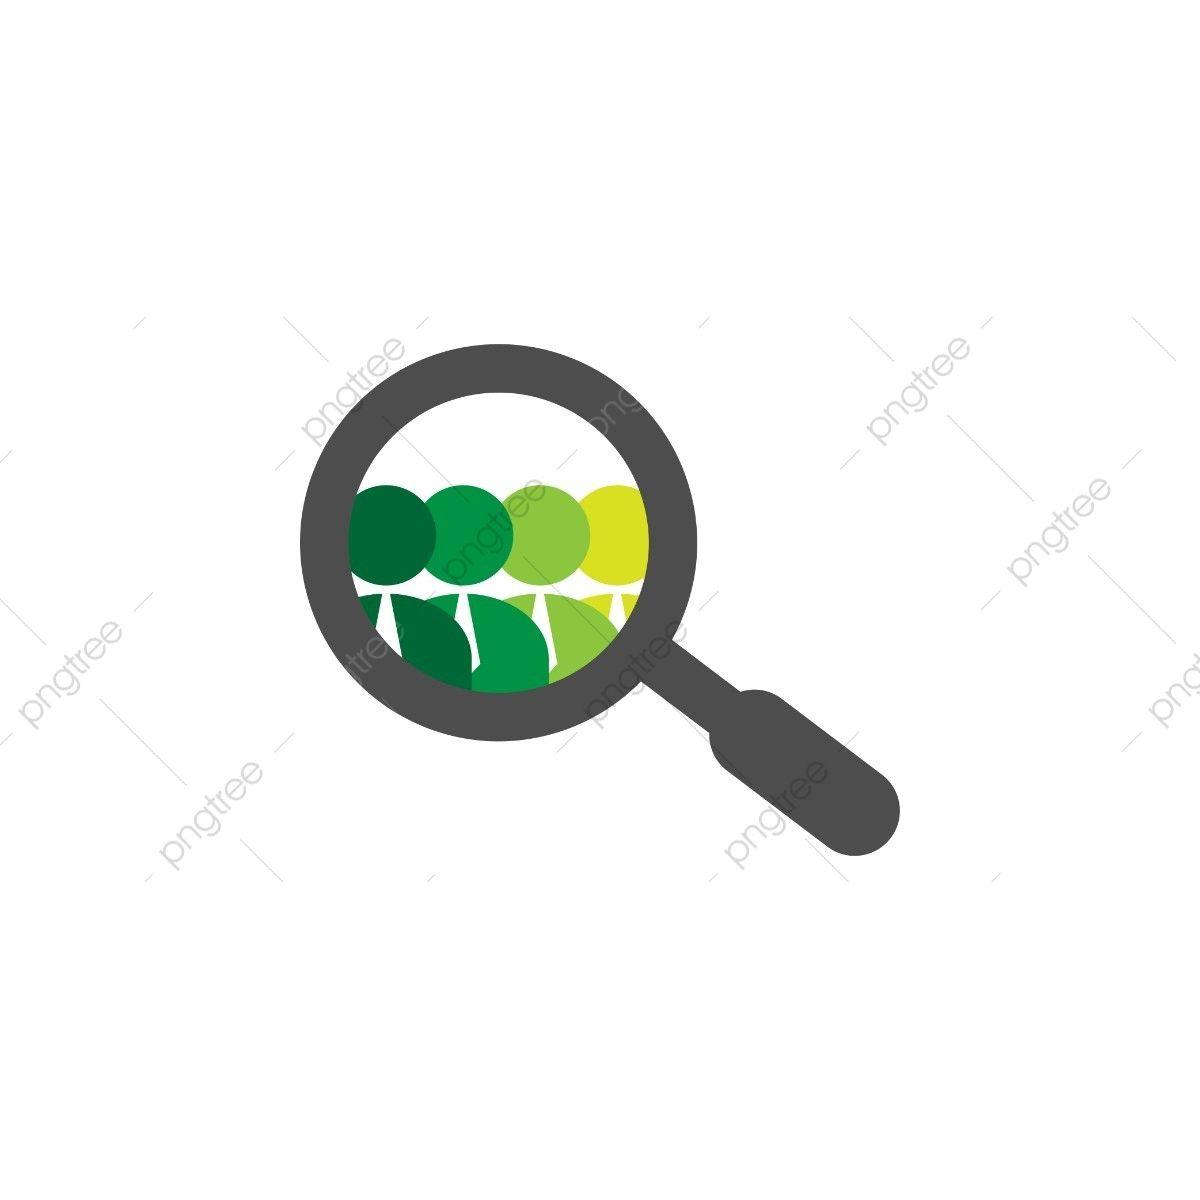 Seeker Logo - Job Seeker Logo Icon Template, Hire, Look, Corporate PNG and Vector ...